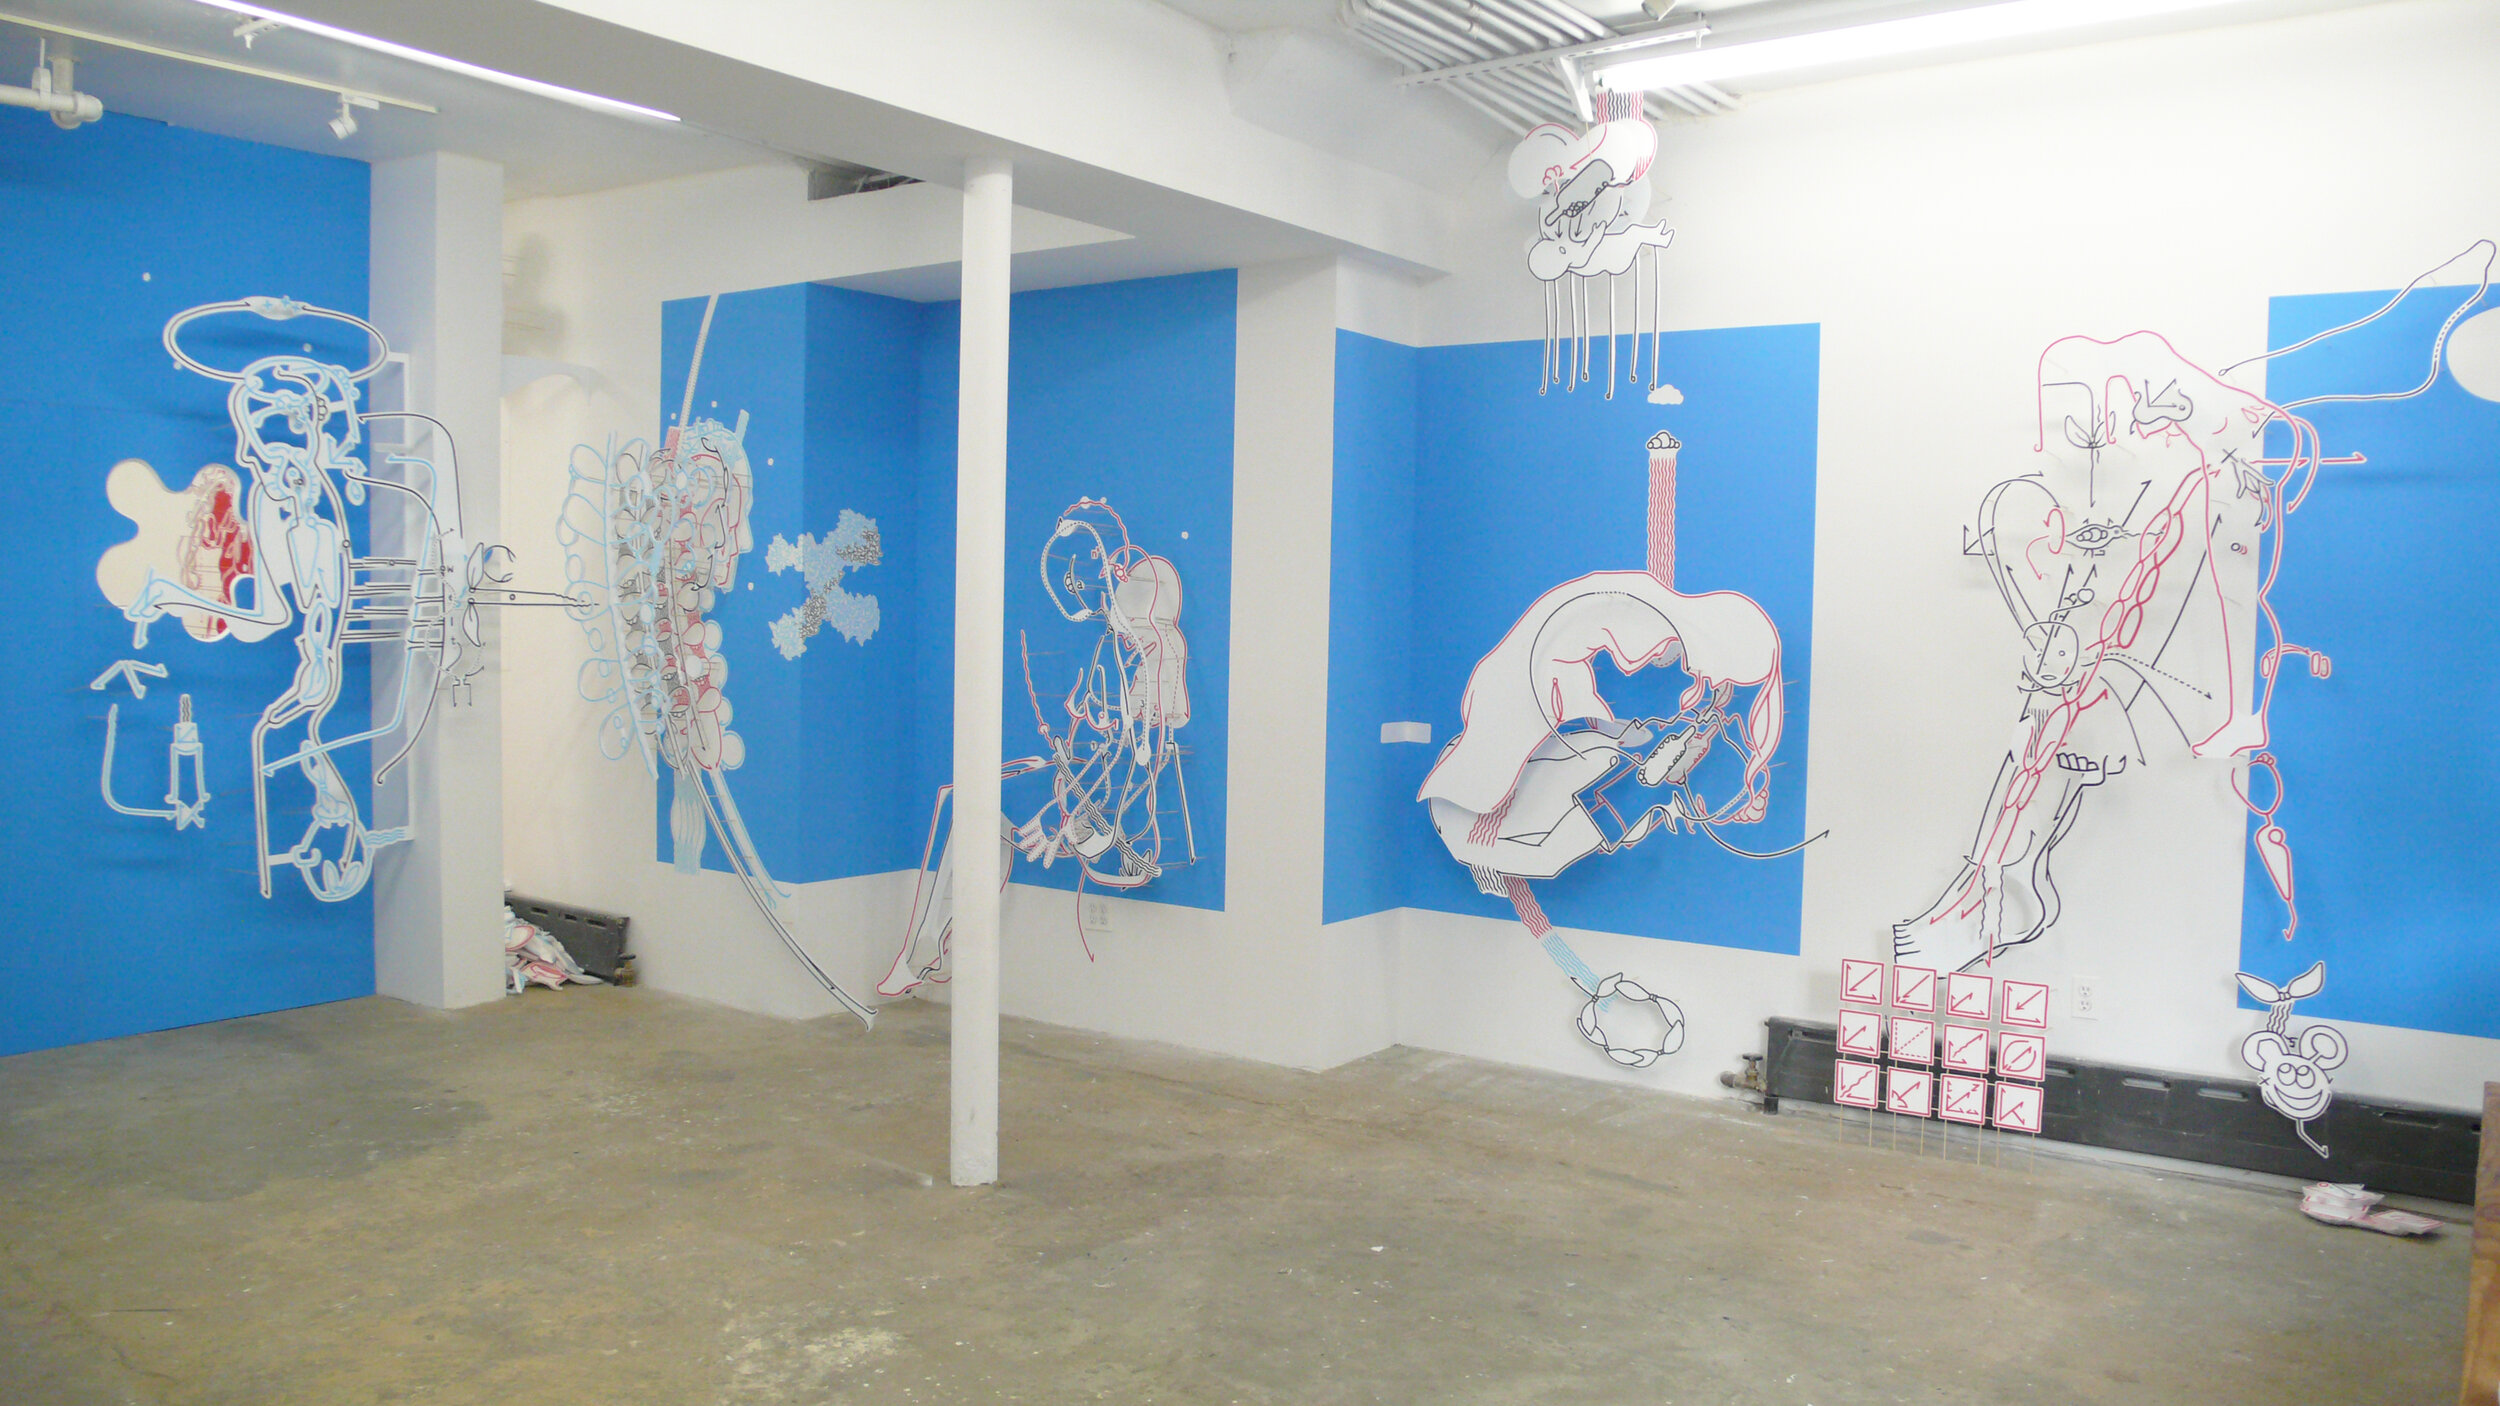 Installation image from the 2011 Hannes Kater exhibition, A SENSE OF WHERE YOU ARE, at Cindy Rucker Gallery